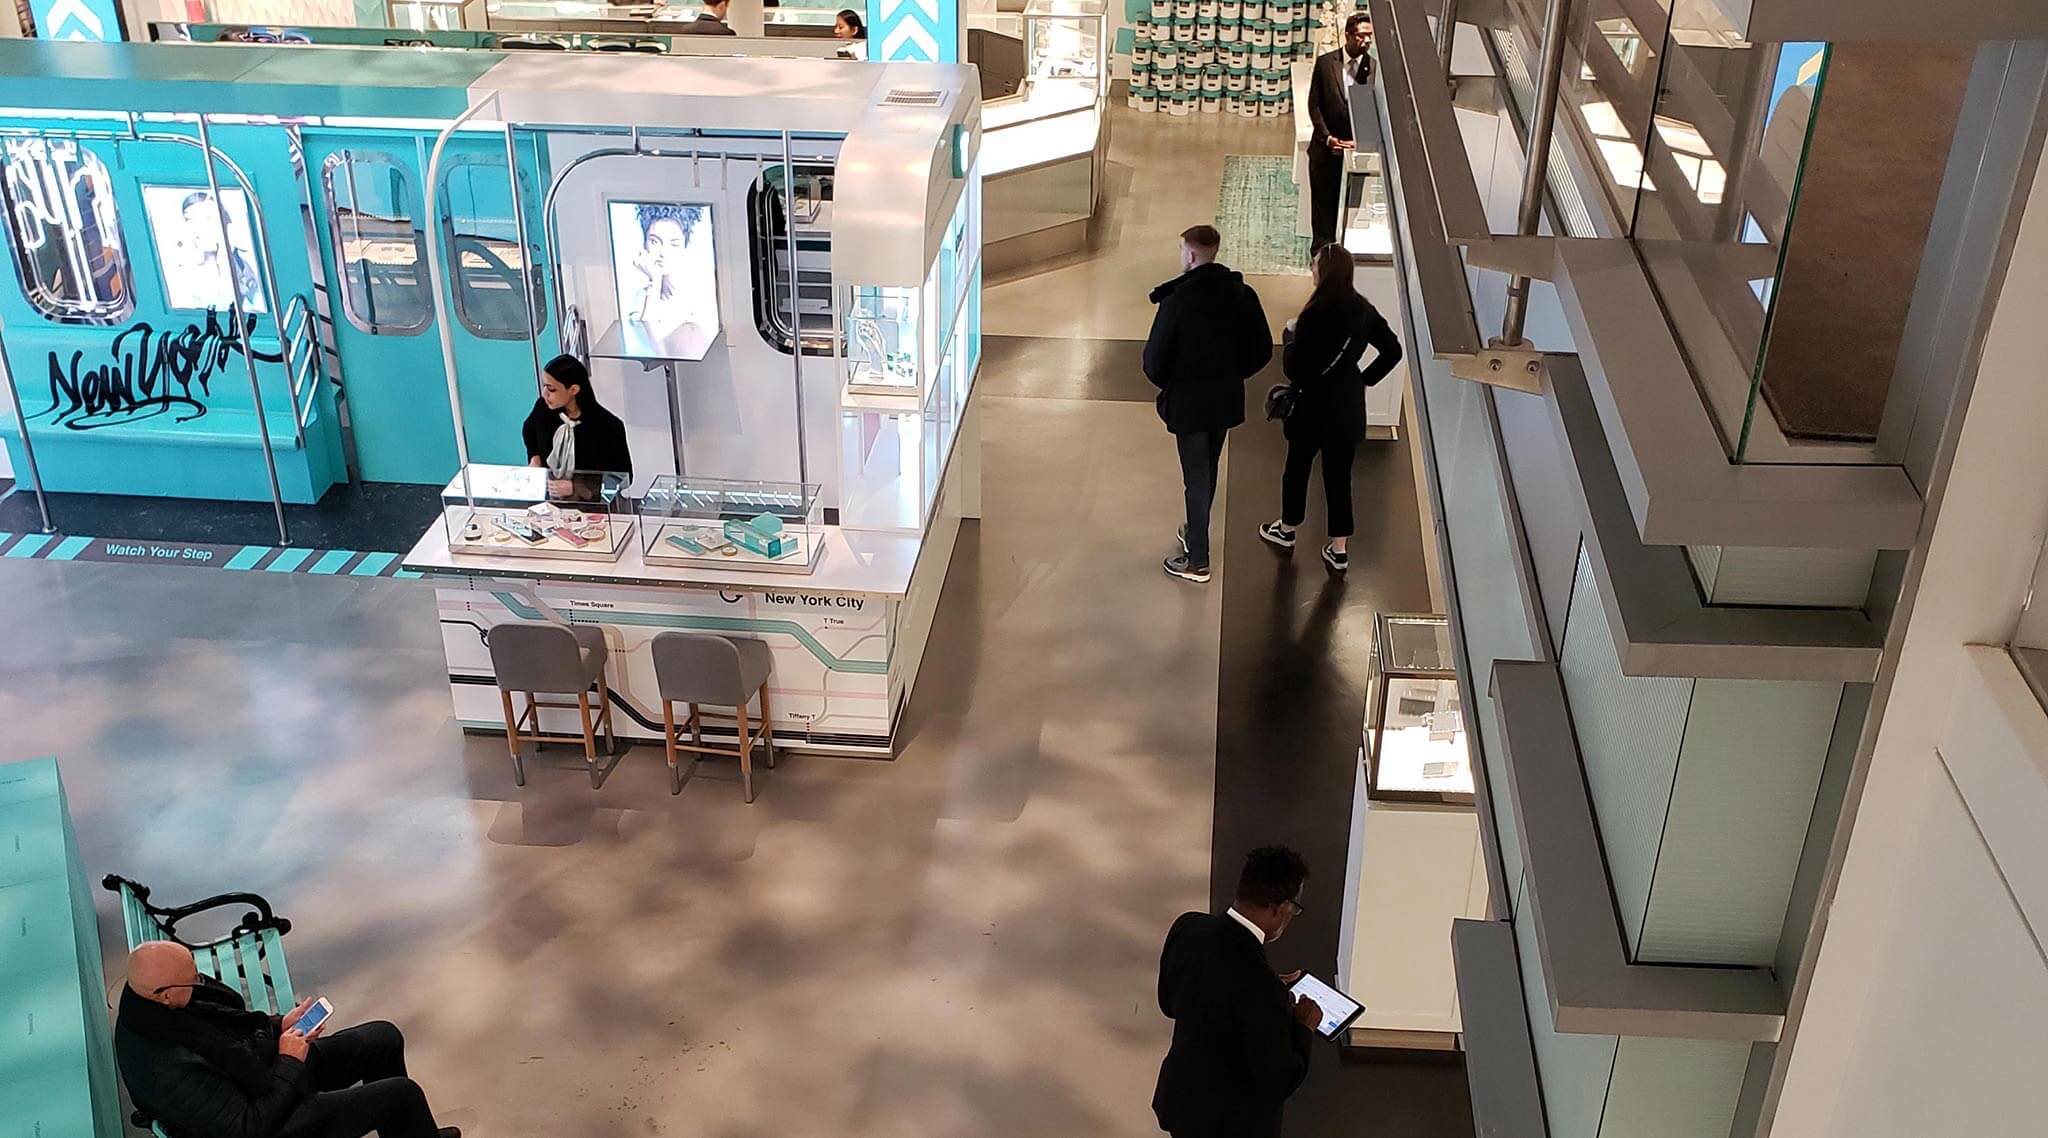 Tiffany Co NYC Terrazzi Spayable Polished Concrete Floors by Duraamen img 0001 Creating a Sophisticated and Stylish Concrete Retail Floor for Tiffany Co | Duraamen | Duraamen Engineered Products Inc